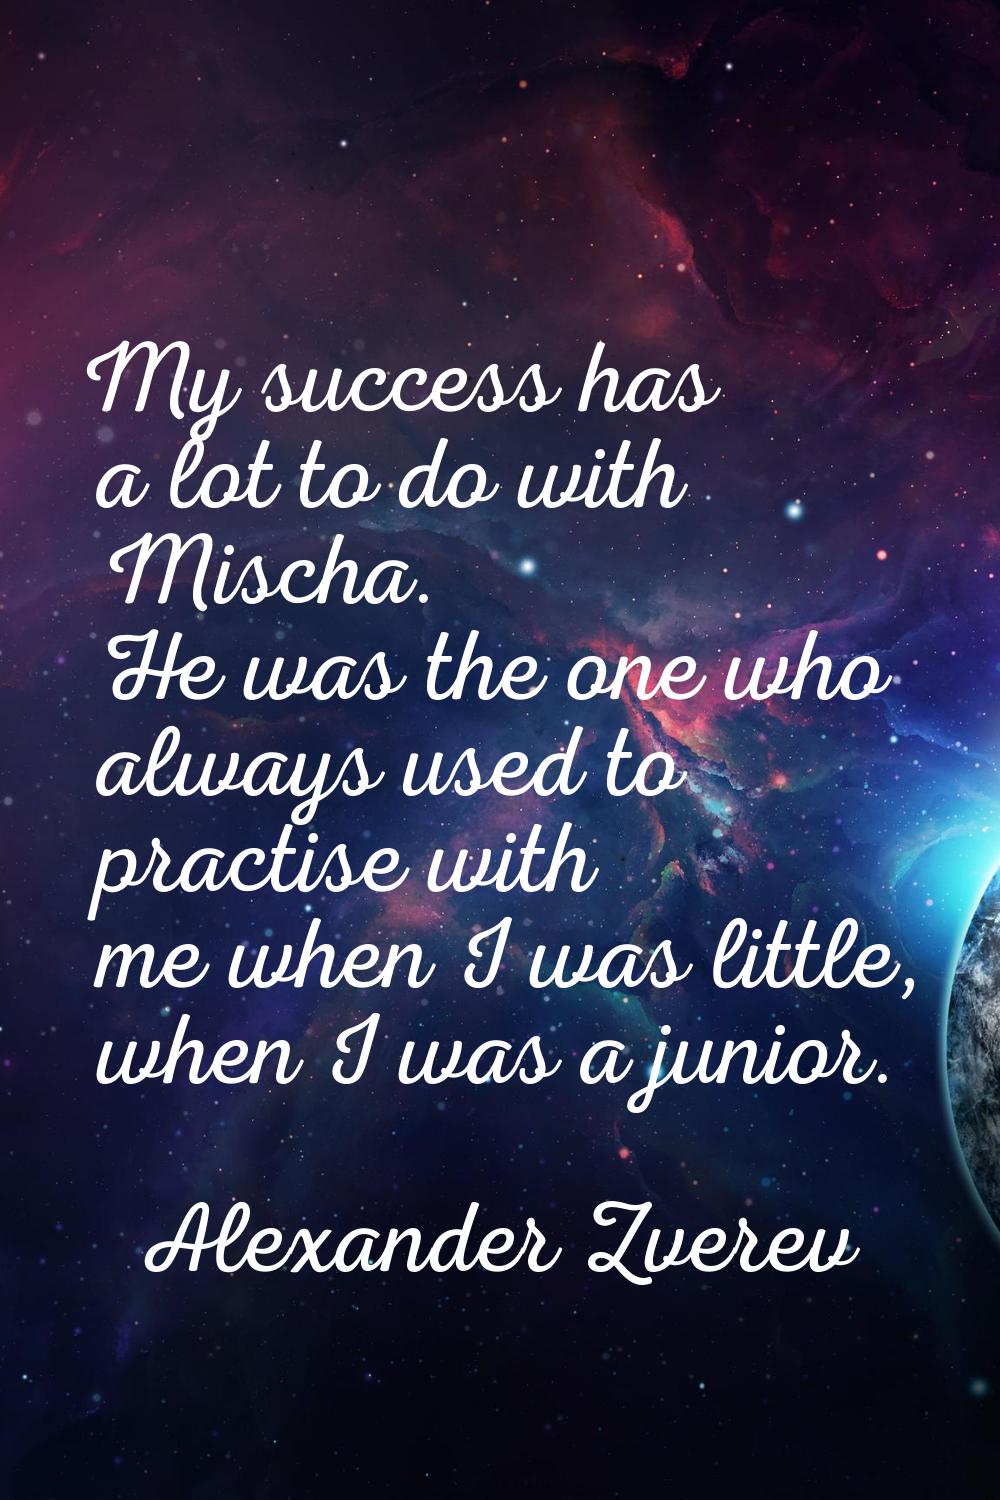 My success has a lot to do with Mischa. He was the one who always used to practise with me when I w